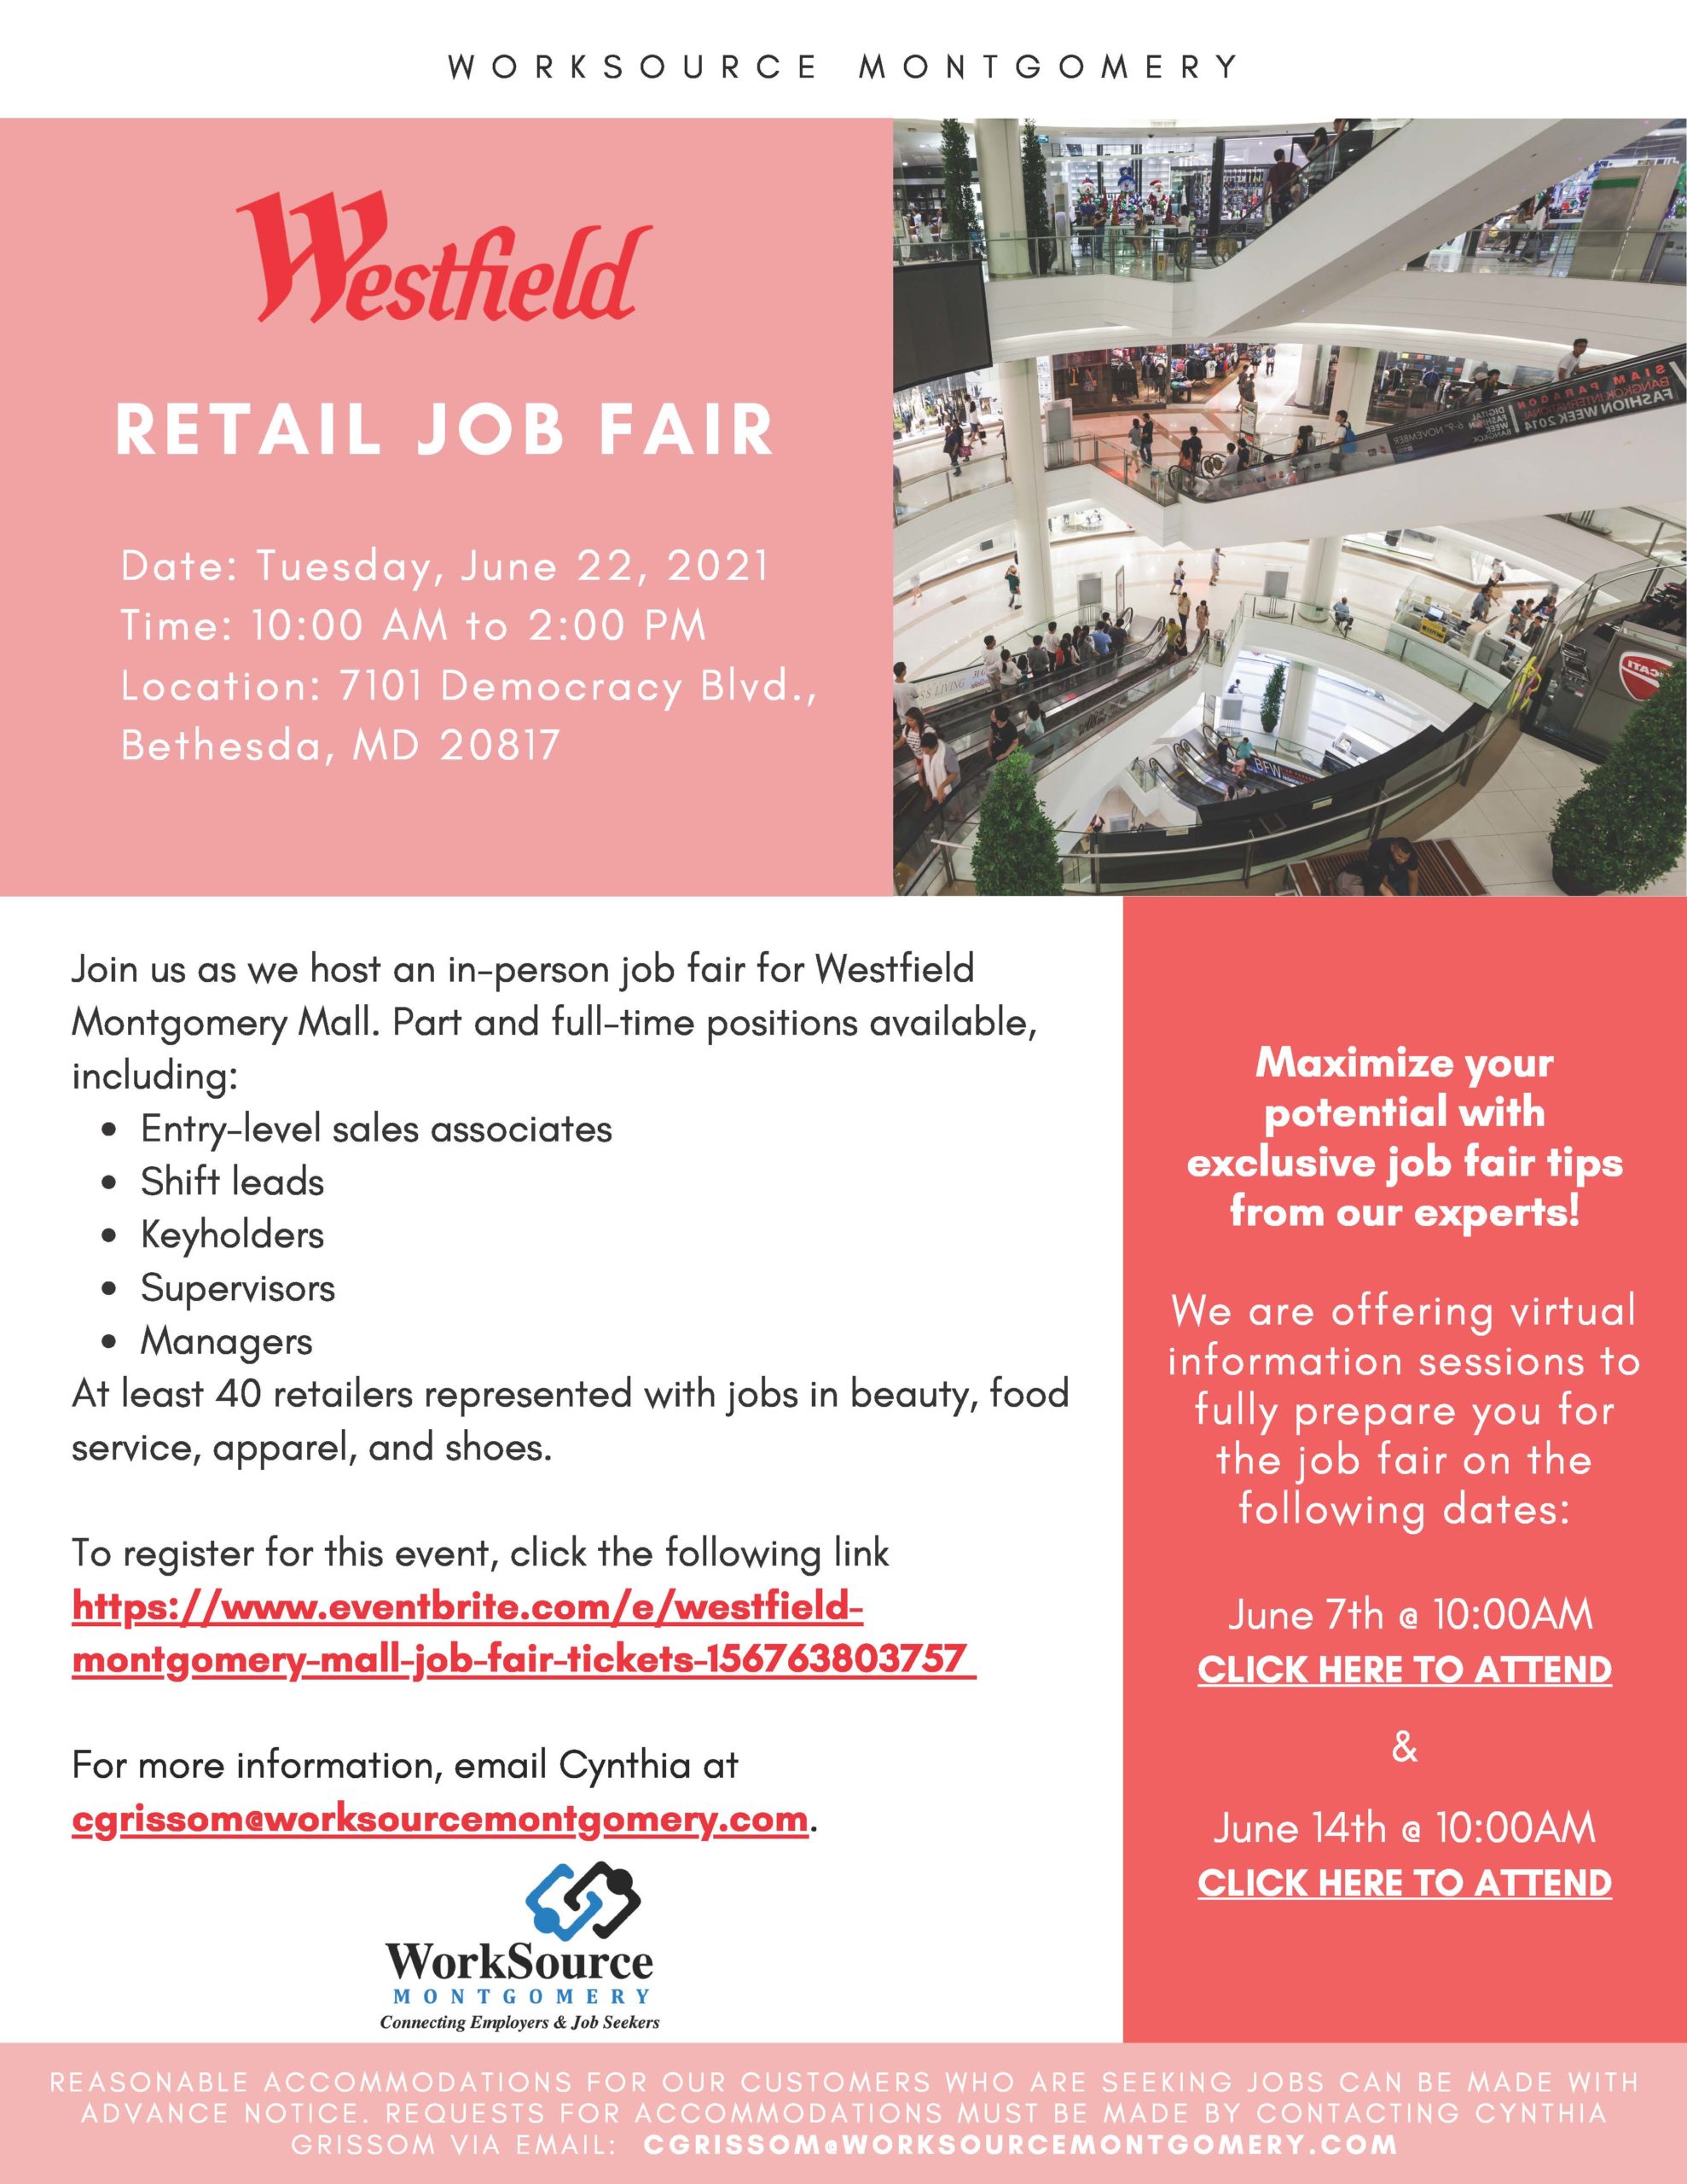 Westfield Retail Job Fair Employ Prince Incorporated